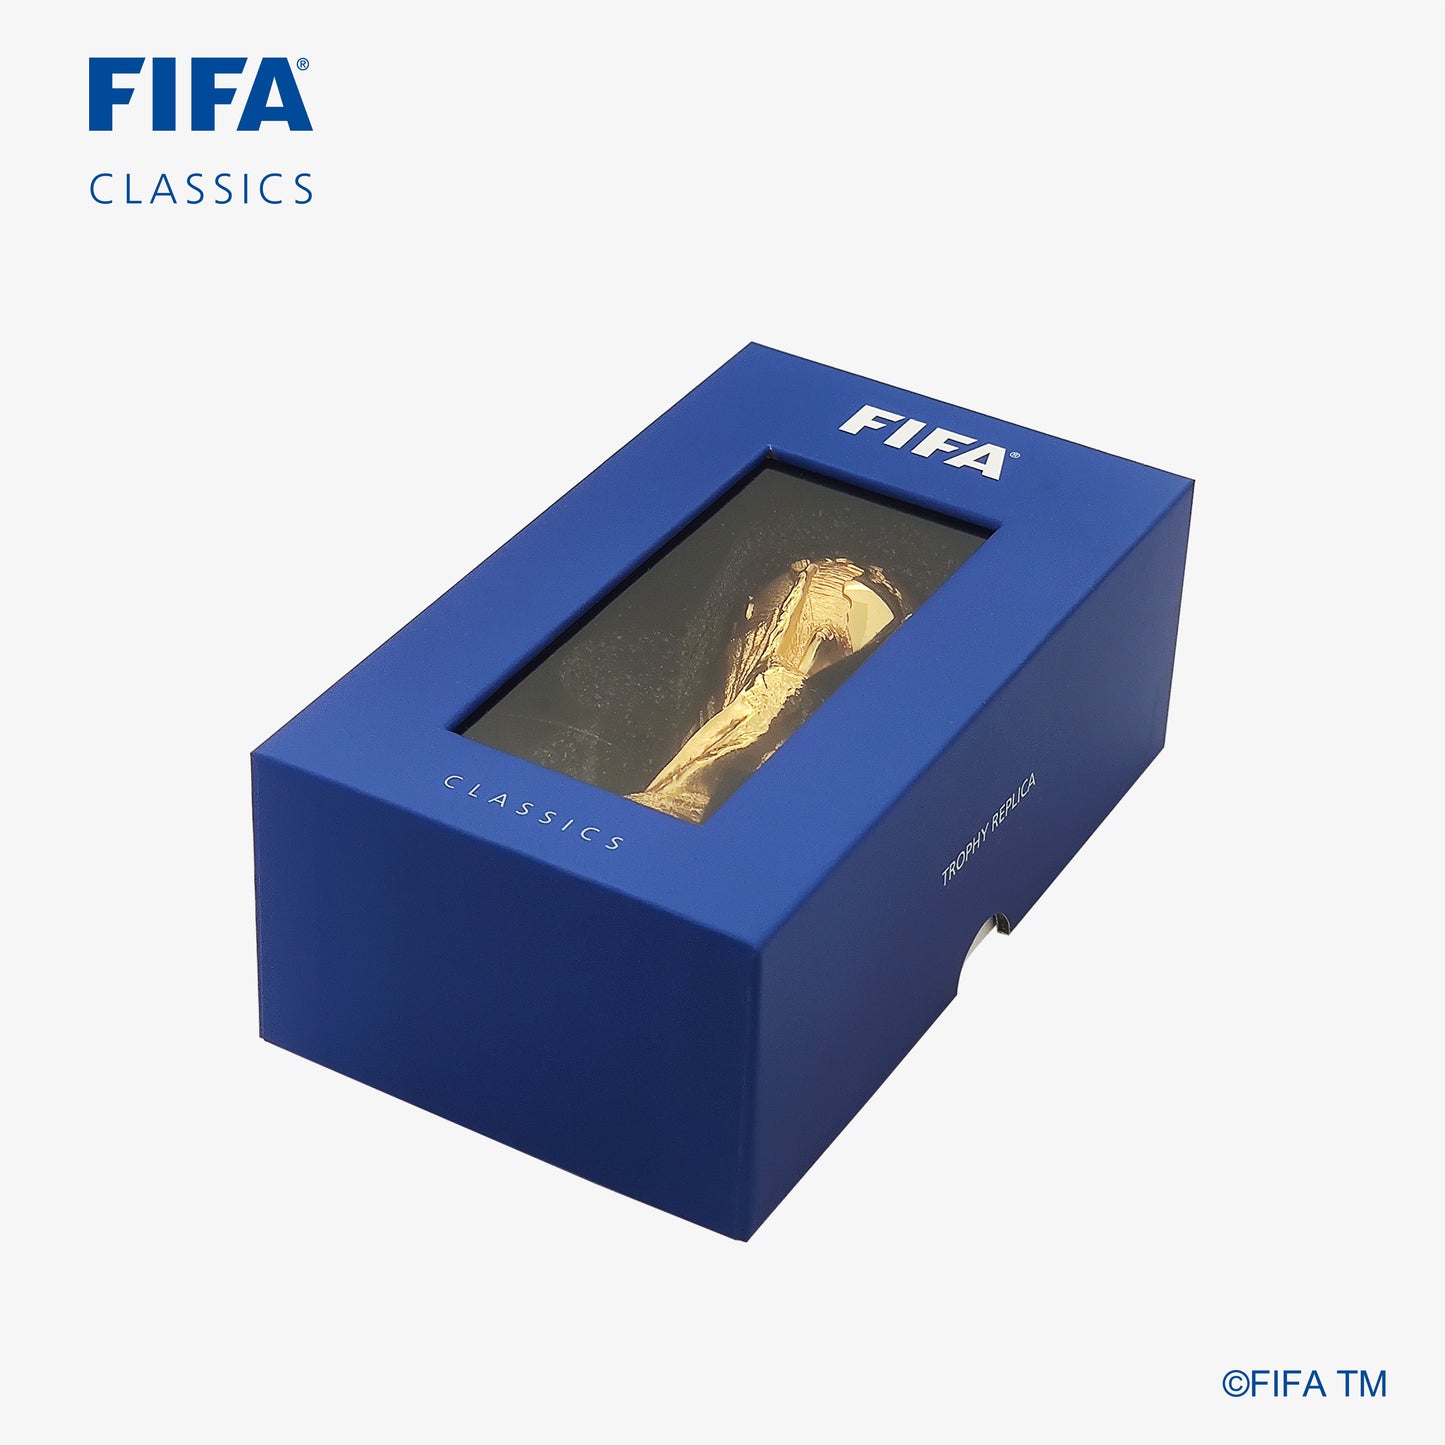 100mm World Cup Trophy Replica